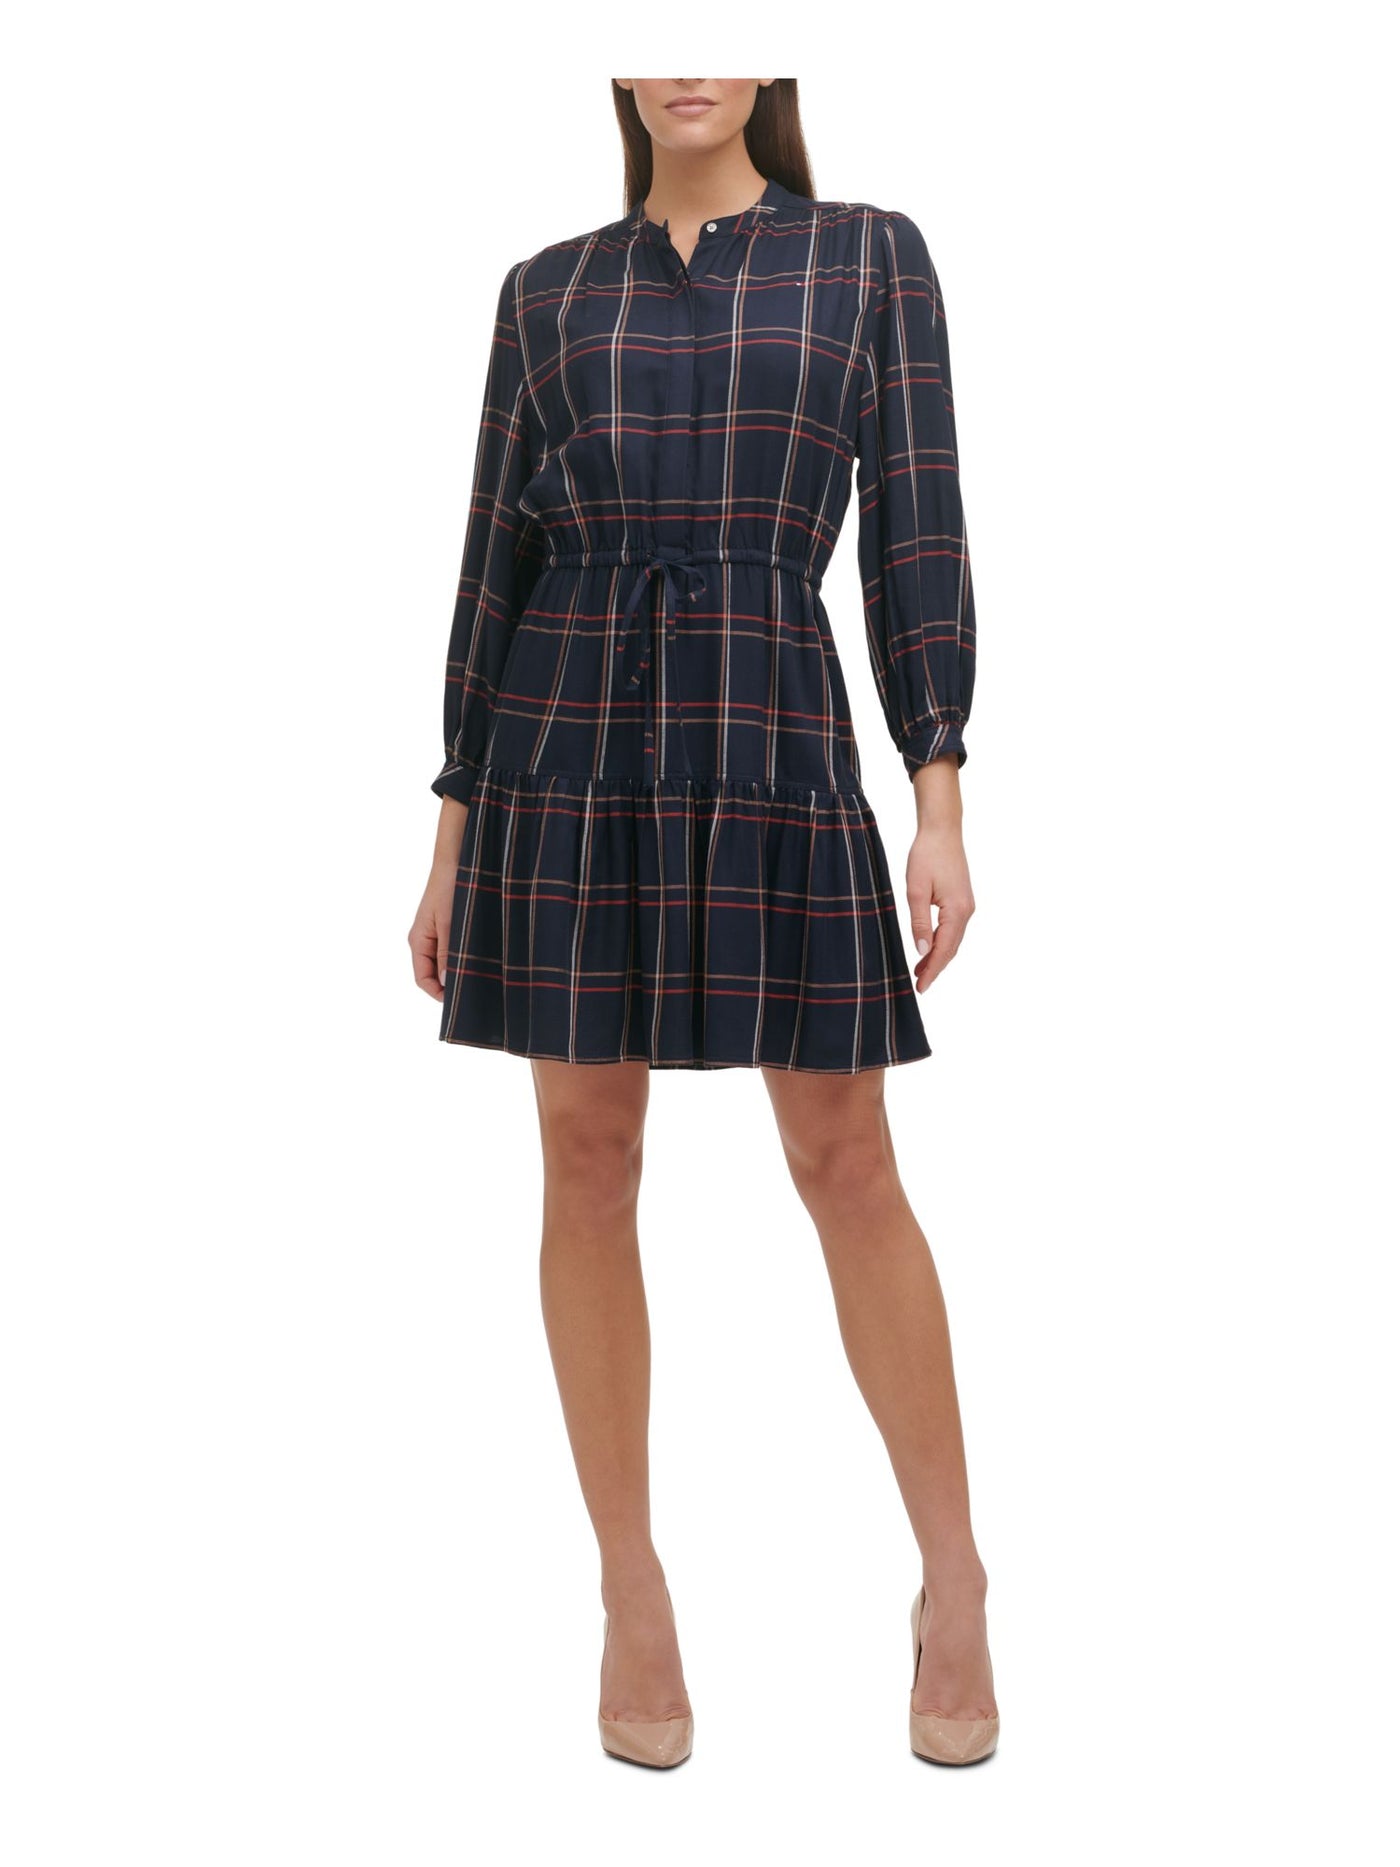 TOMMY HILFIGER Womens Navy Plaid Cuffed Sleeve Round Neck Short Cocktail Ruffled Dress 14